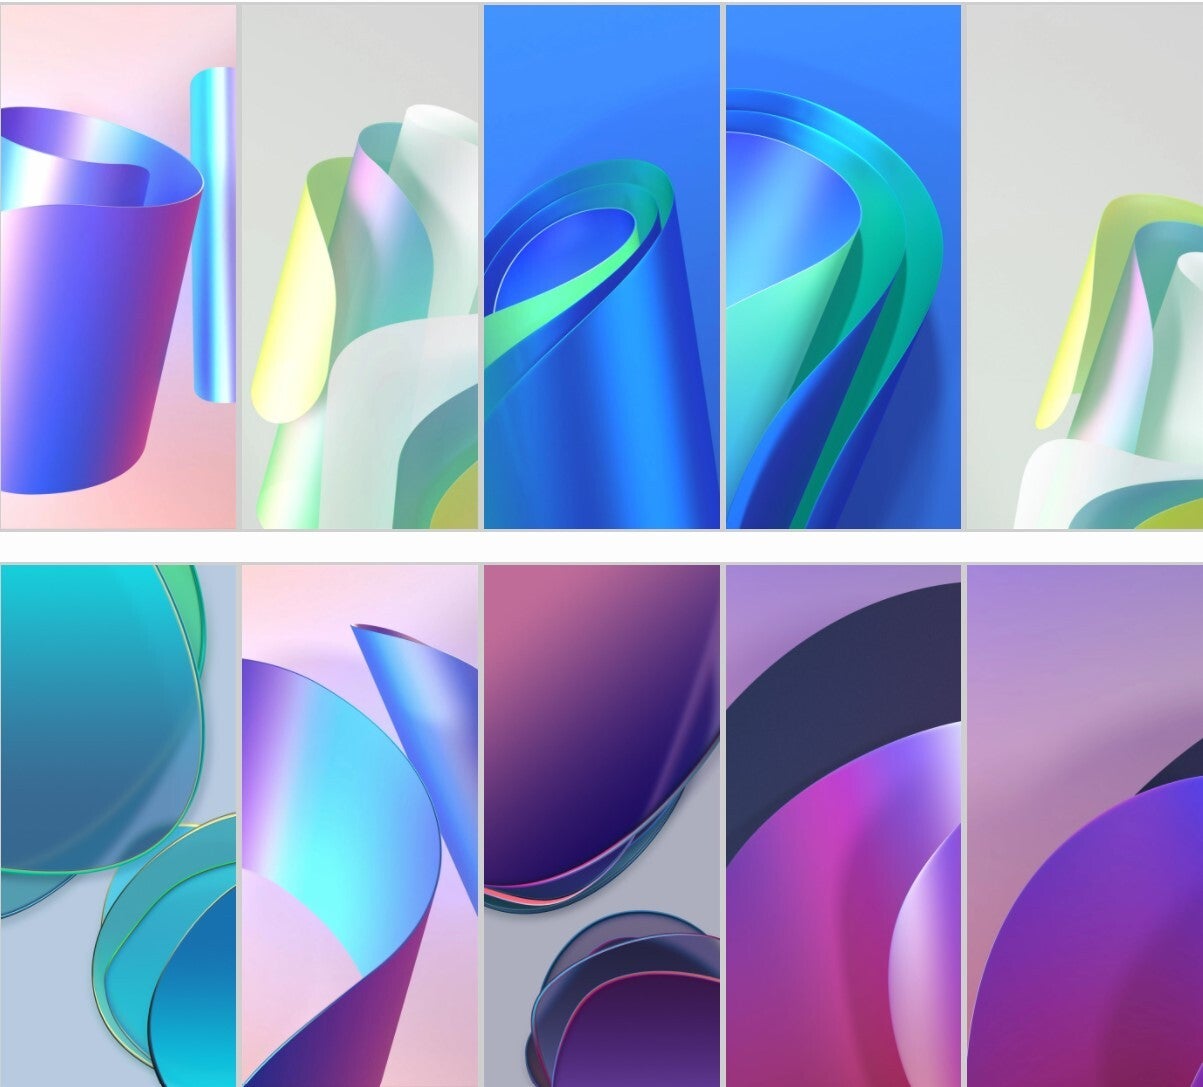 A preview of the possible OnePlus 8T wallpapers - OnePlus 8T stock wallpapers images have been leaked online